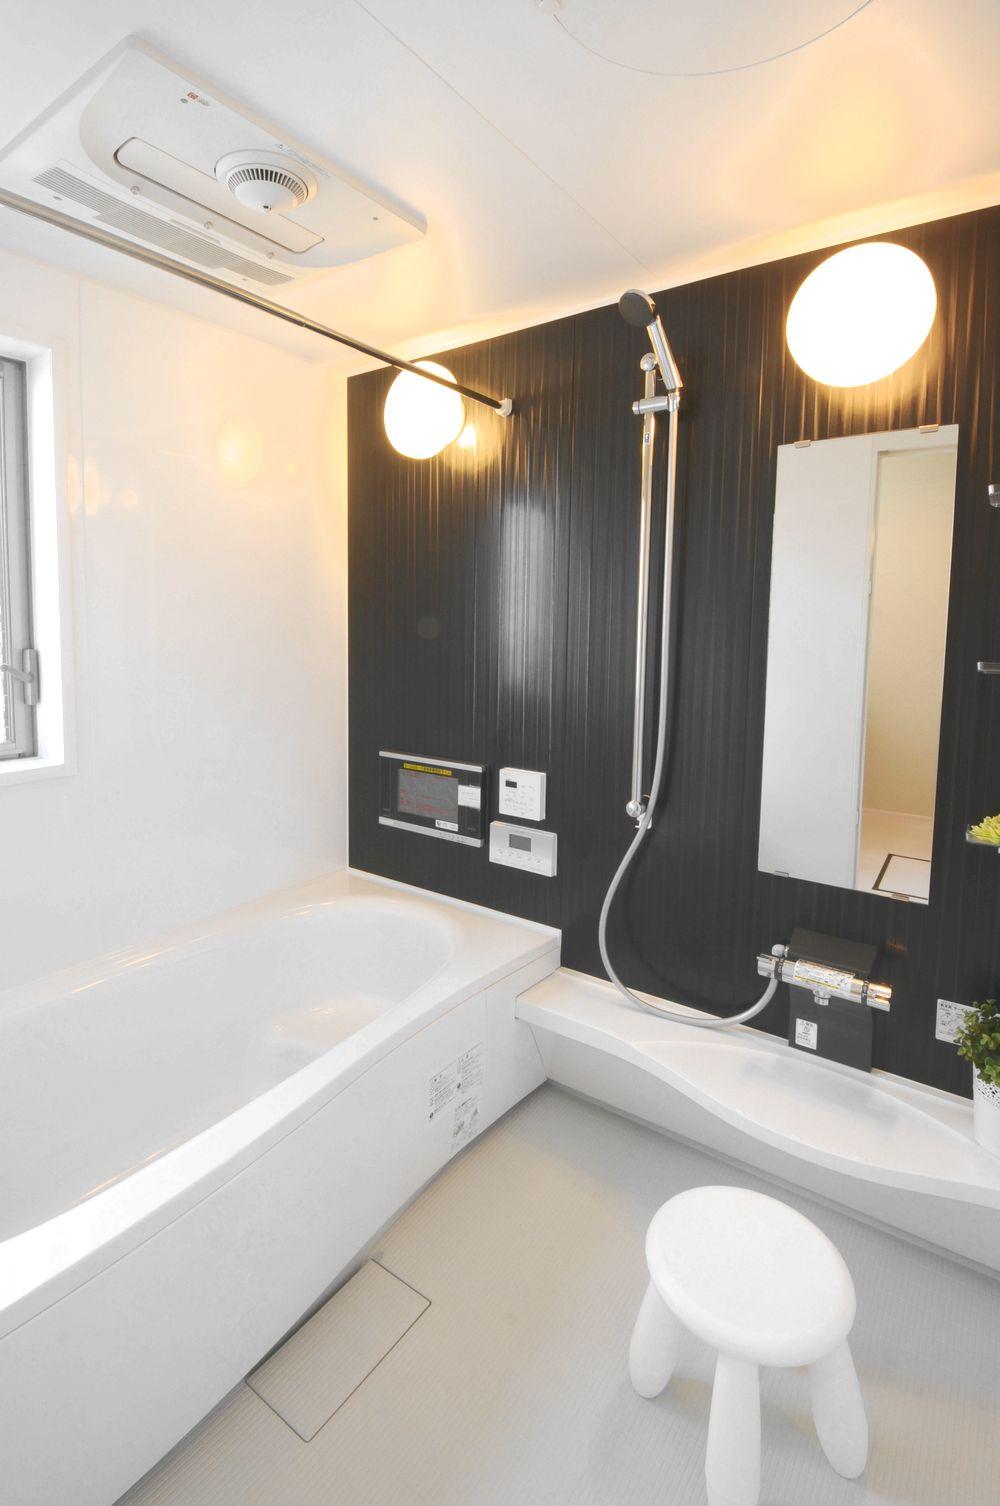 Bathroom. Same specifications Photos Year also improve the professional skills of staff training real estate with more than 30 kinds, To support our customers in the best. 